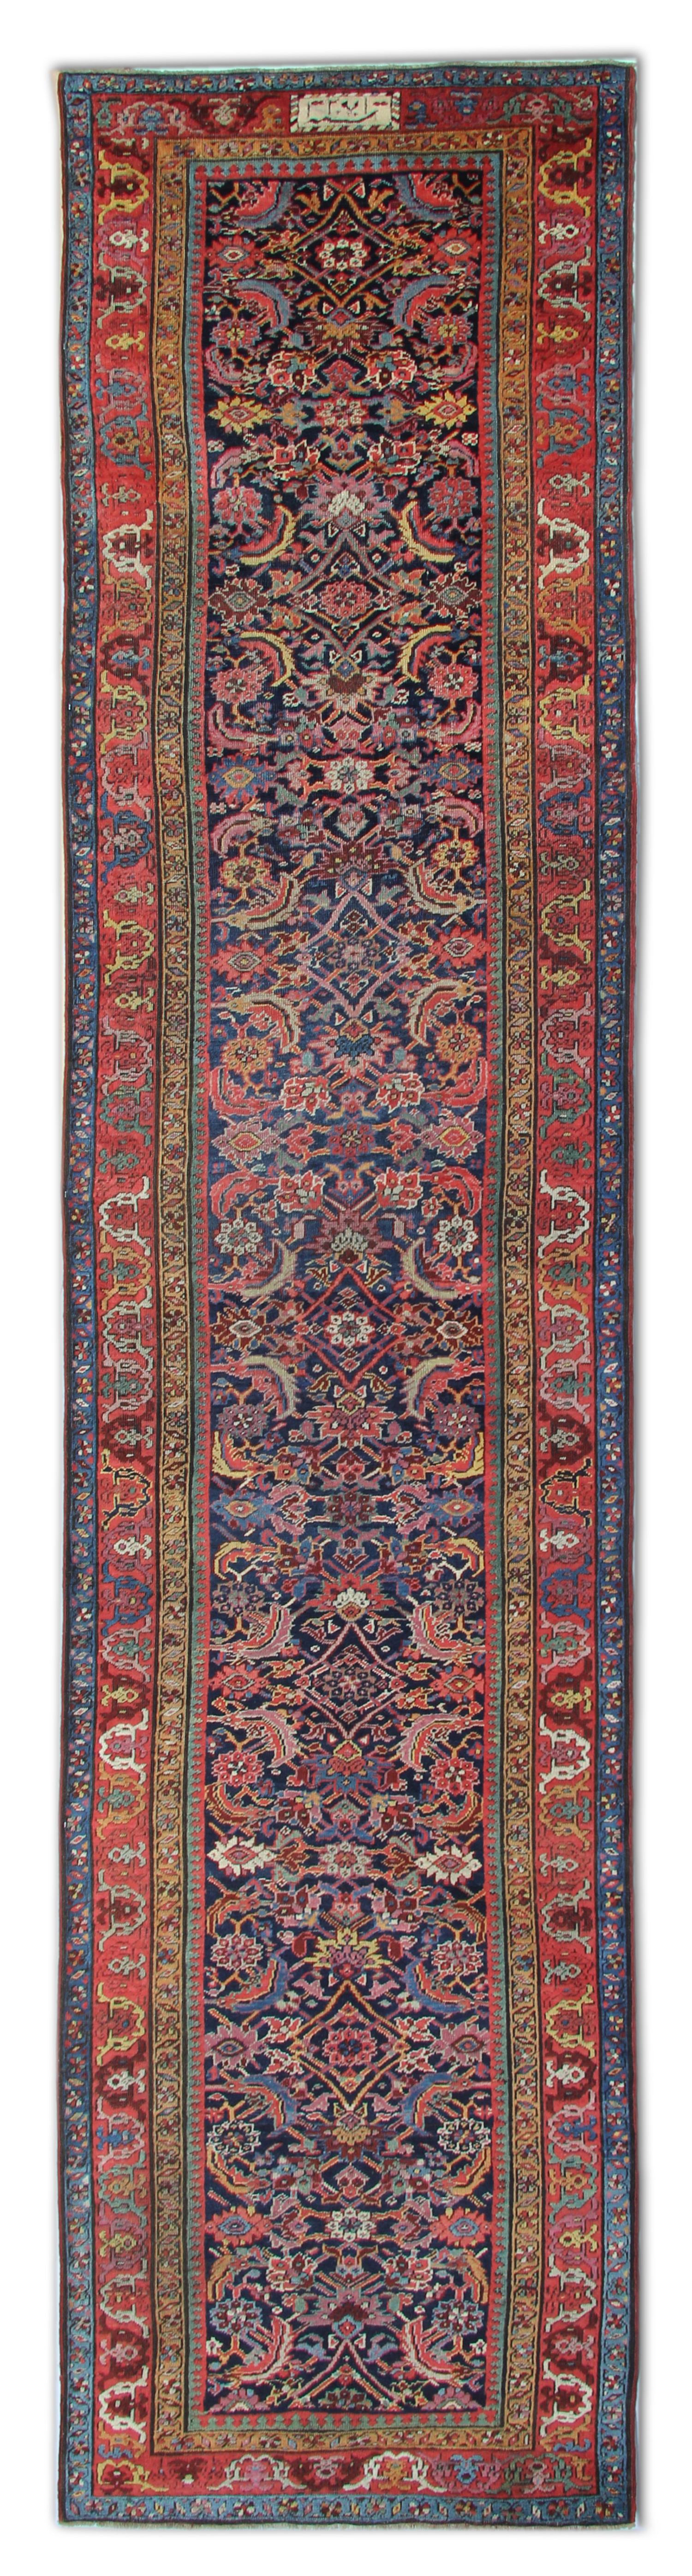 Handmade carpet Caucasian runner rug unique and vintage rugs carpet runner is primarily produced as city productions pieces. Made from materials particular to individual tribal provinces and the living room rugs of the Caucasus normally display bold